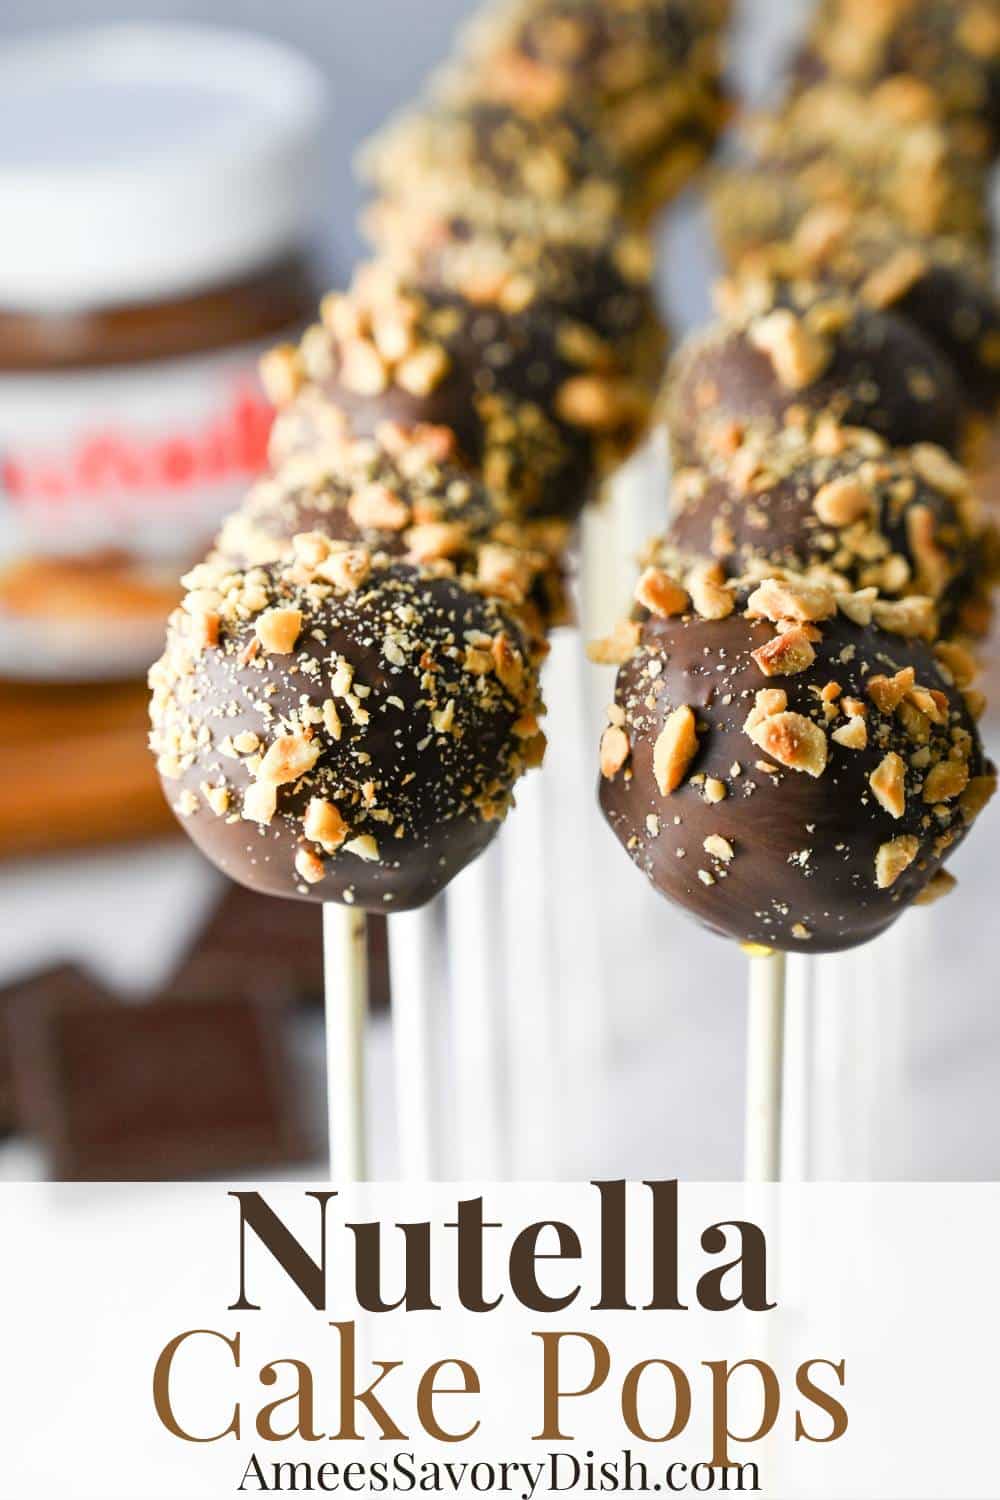 This easy Nutella Cake Pops recipe delivers an irresistible mash-up of rich chocolate cake, creamy chocolate hazelnut spread, and chopped hazelnuts on a stick! via @Ameessavorydish